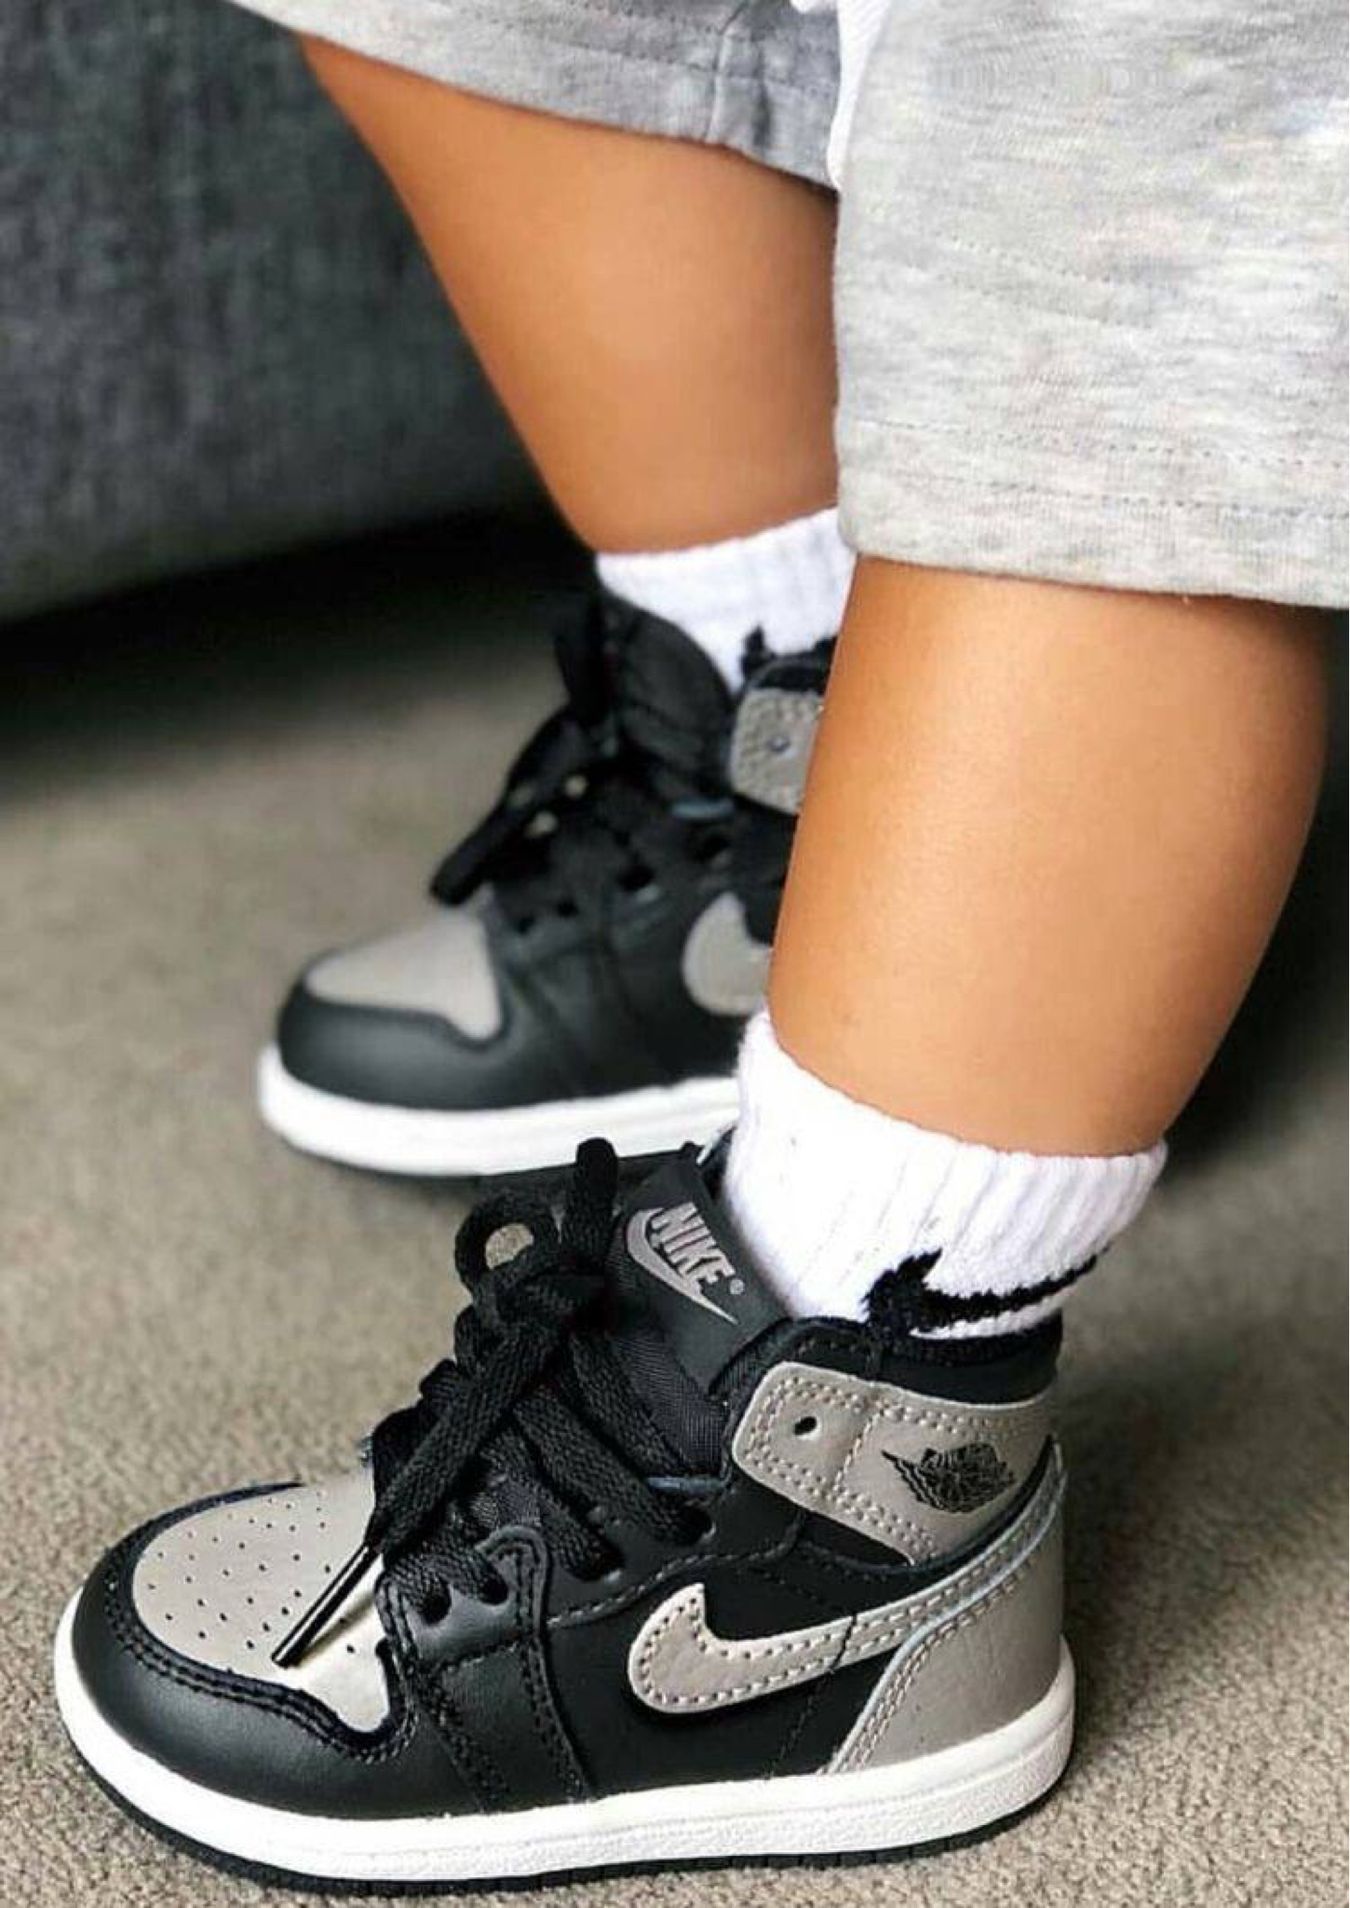 The Cutest Baby Sneakers You’ll Want to
Buy Right Now